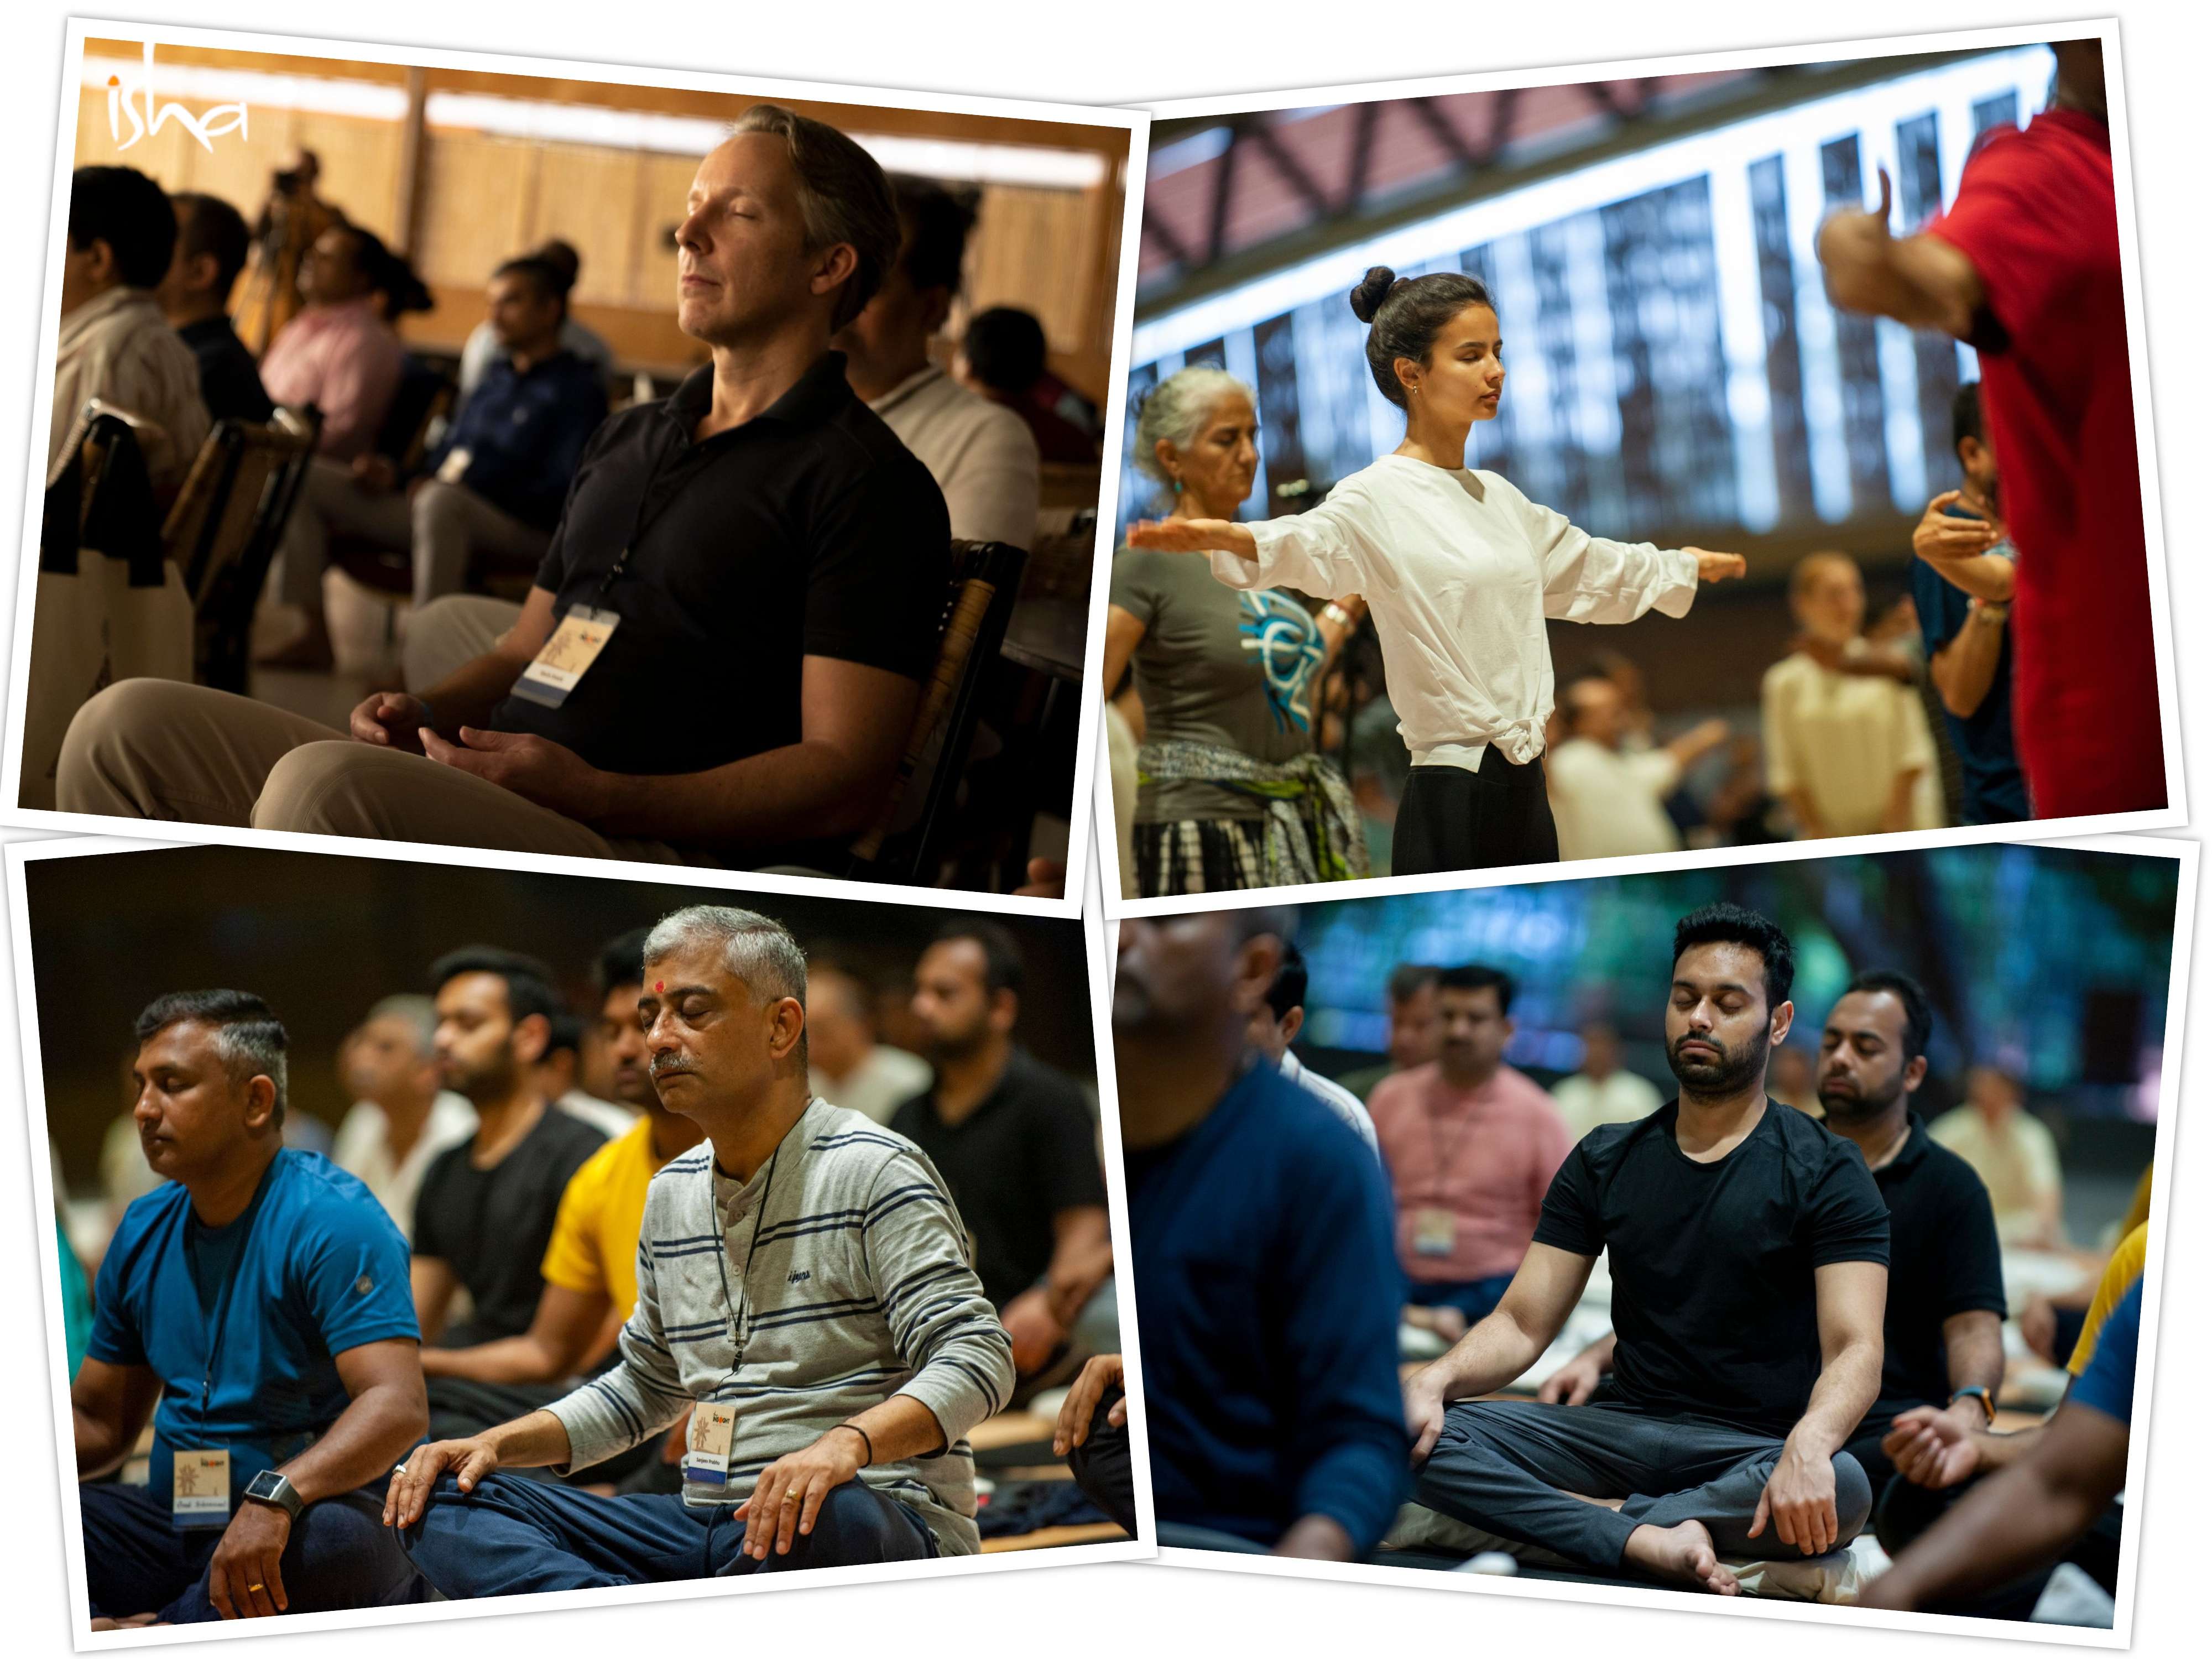 isha_blog_article_insight_2019_day2_participants_doing_yoga_collage_1.jpg 